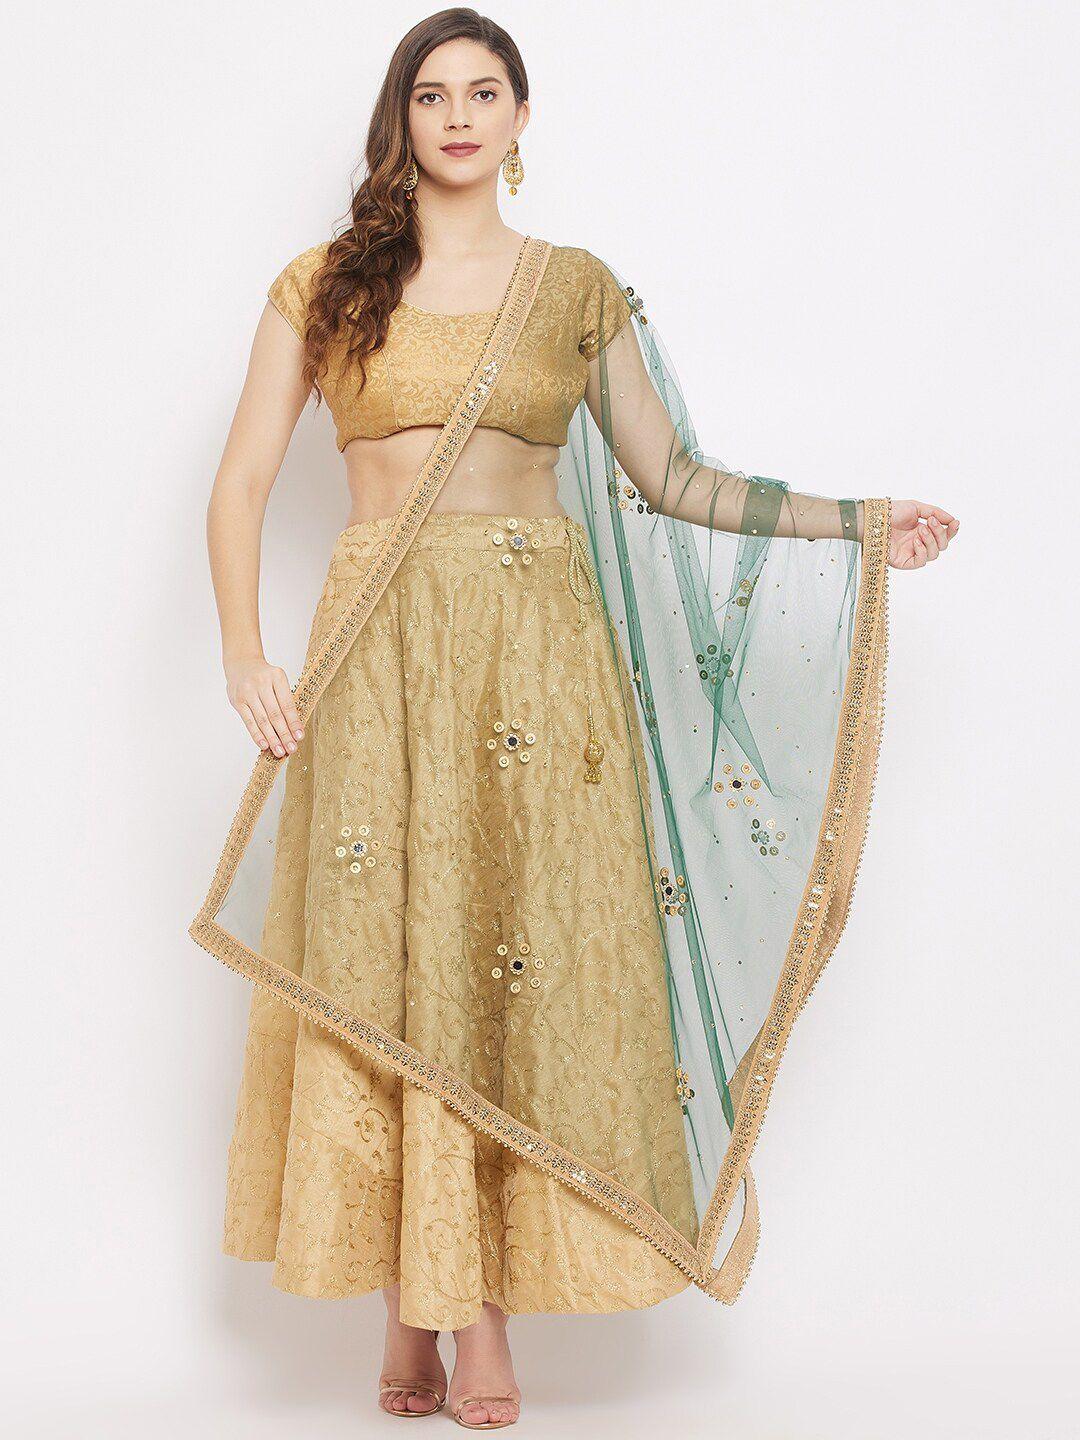 clora creation green & gold-toned ethnic motifs embroidered dupatta with beads and stones